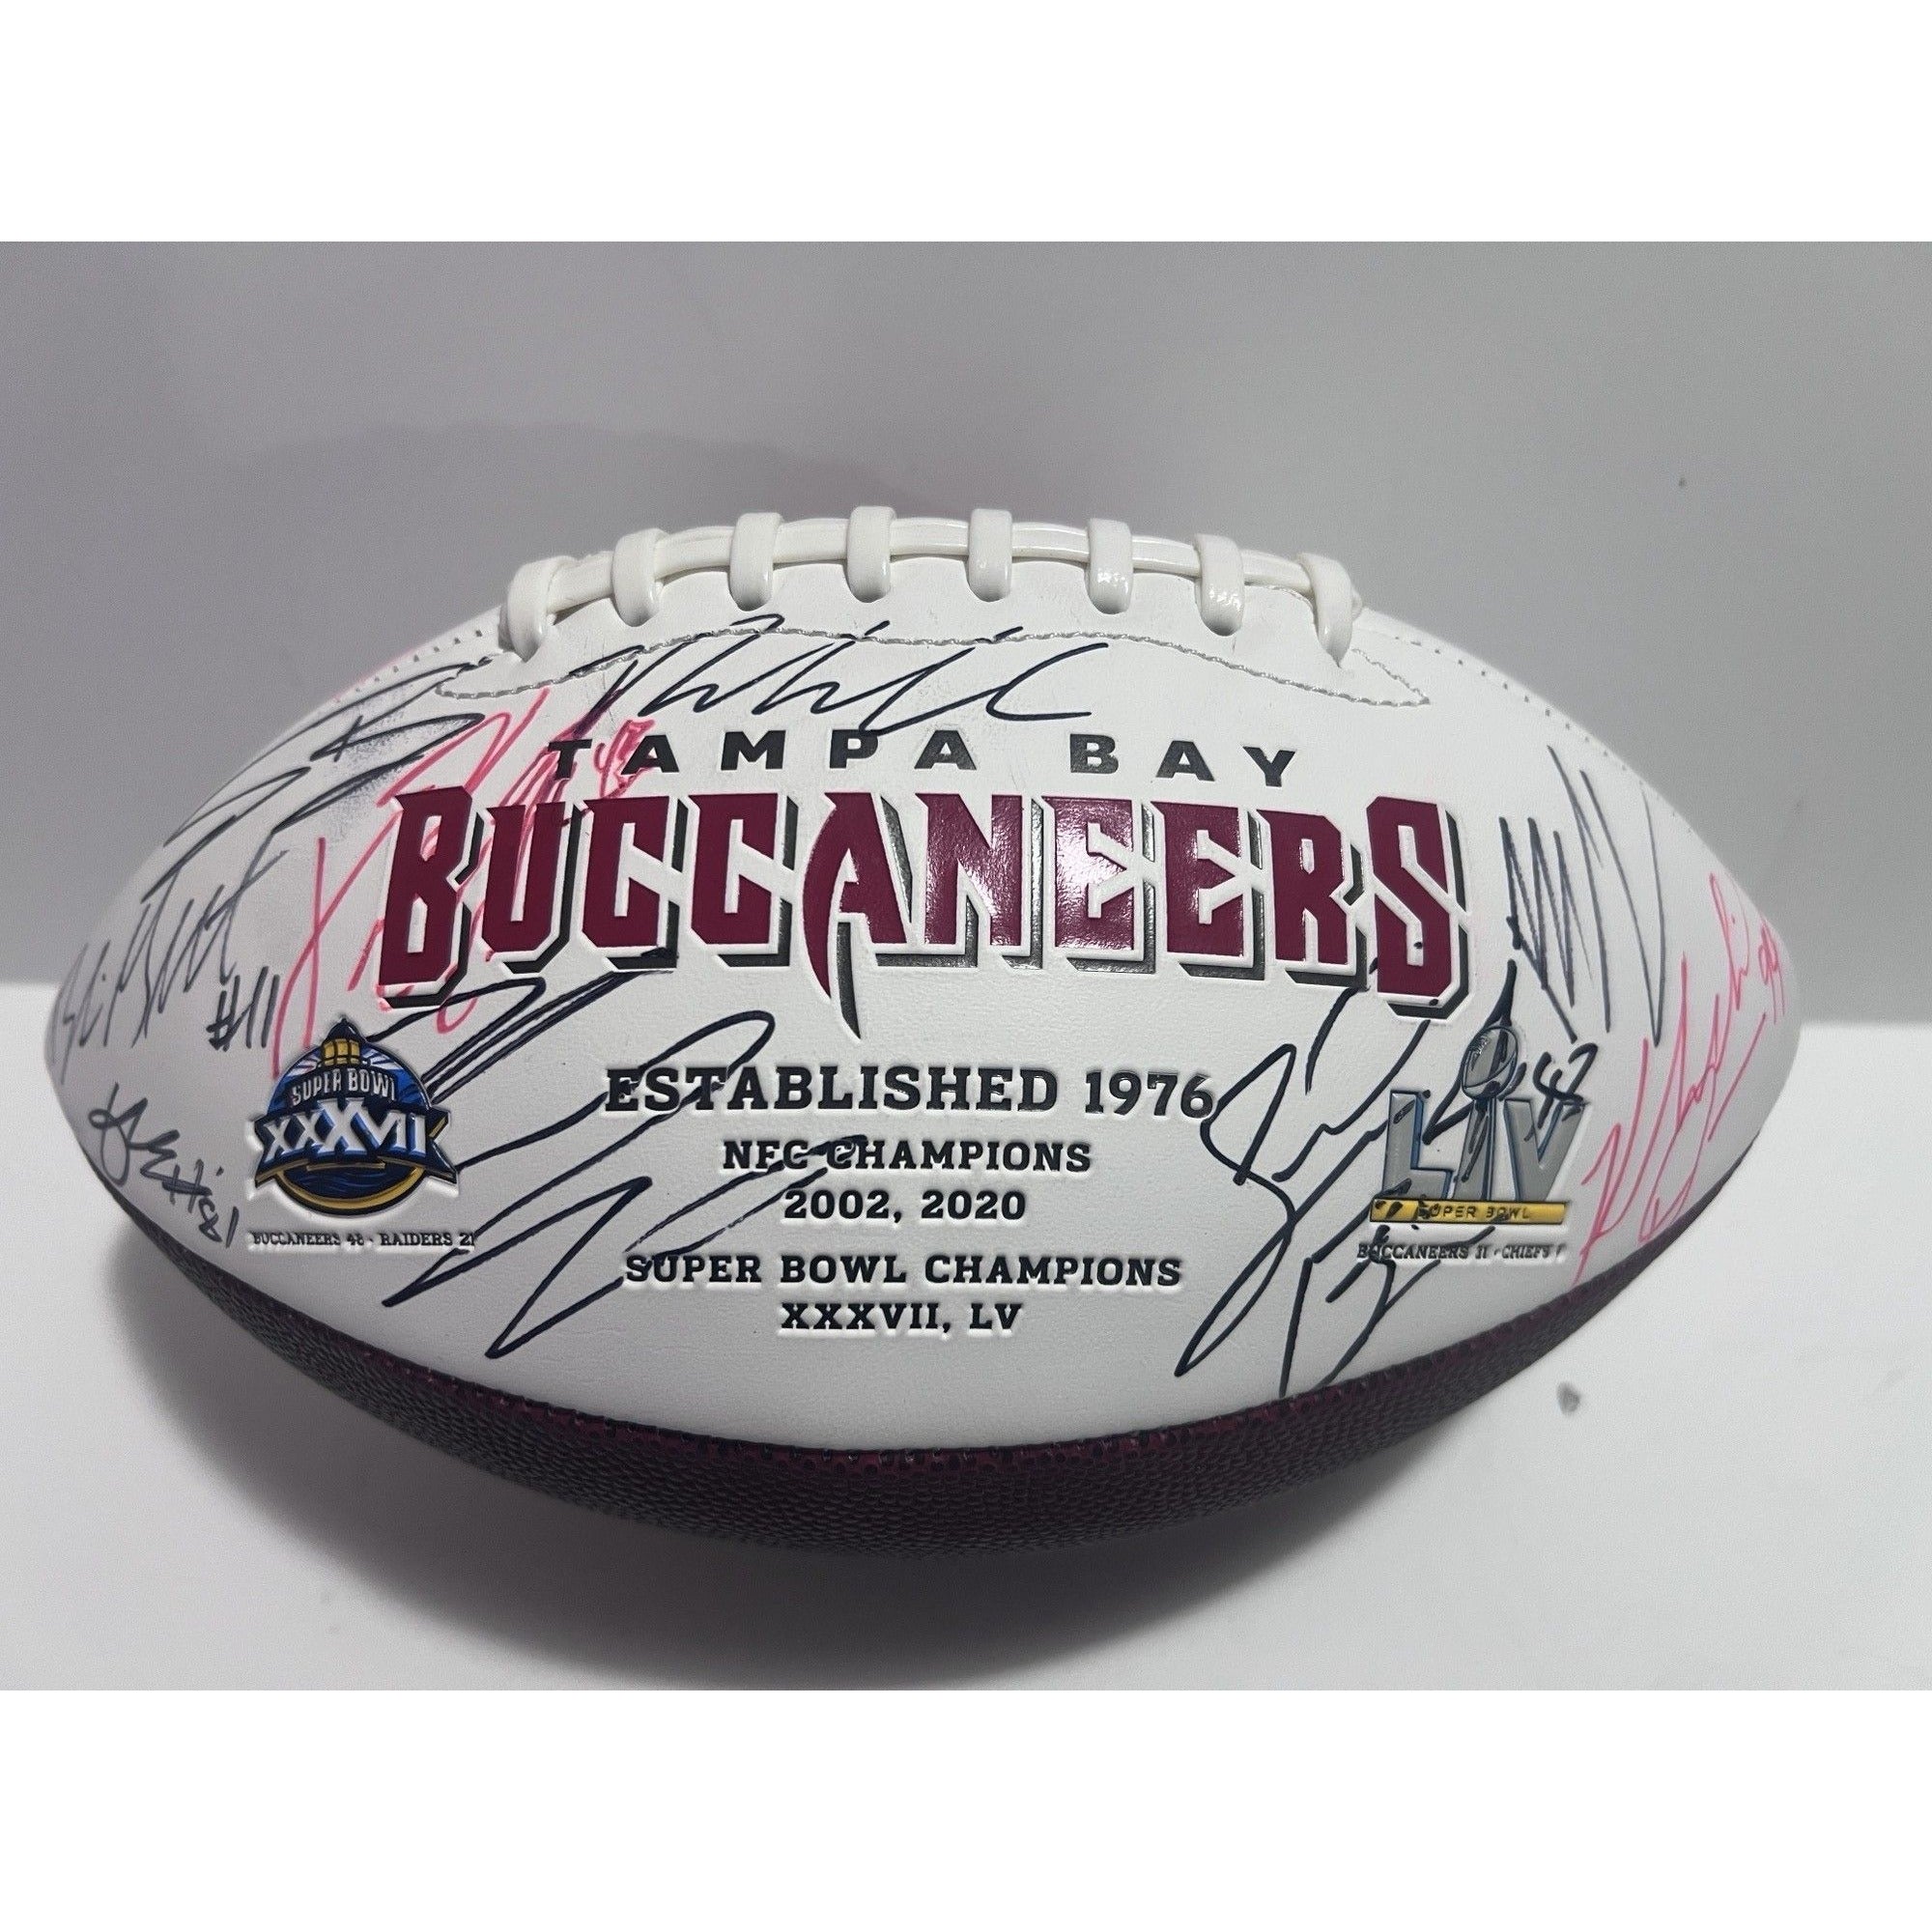 Tampa Bay Buccaneers 2021 Super Bowl champions Tom Brady Bruce Arians Rob Gronkowski Mike Evans complete team signed football with proof